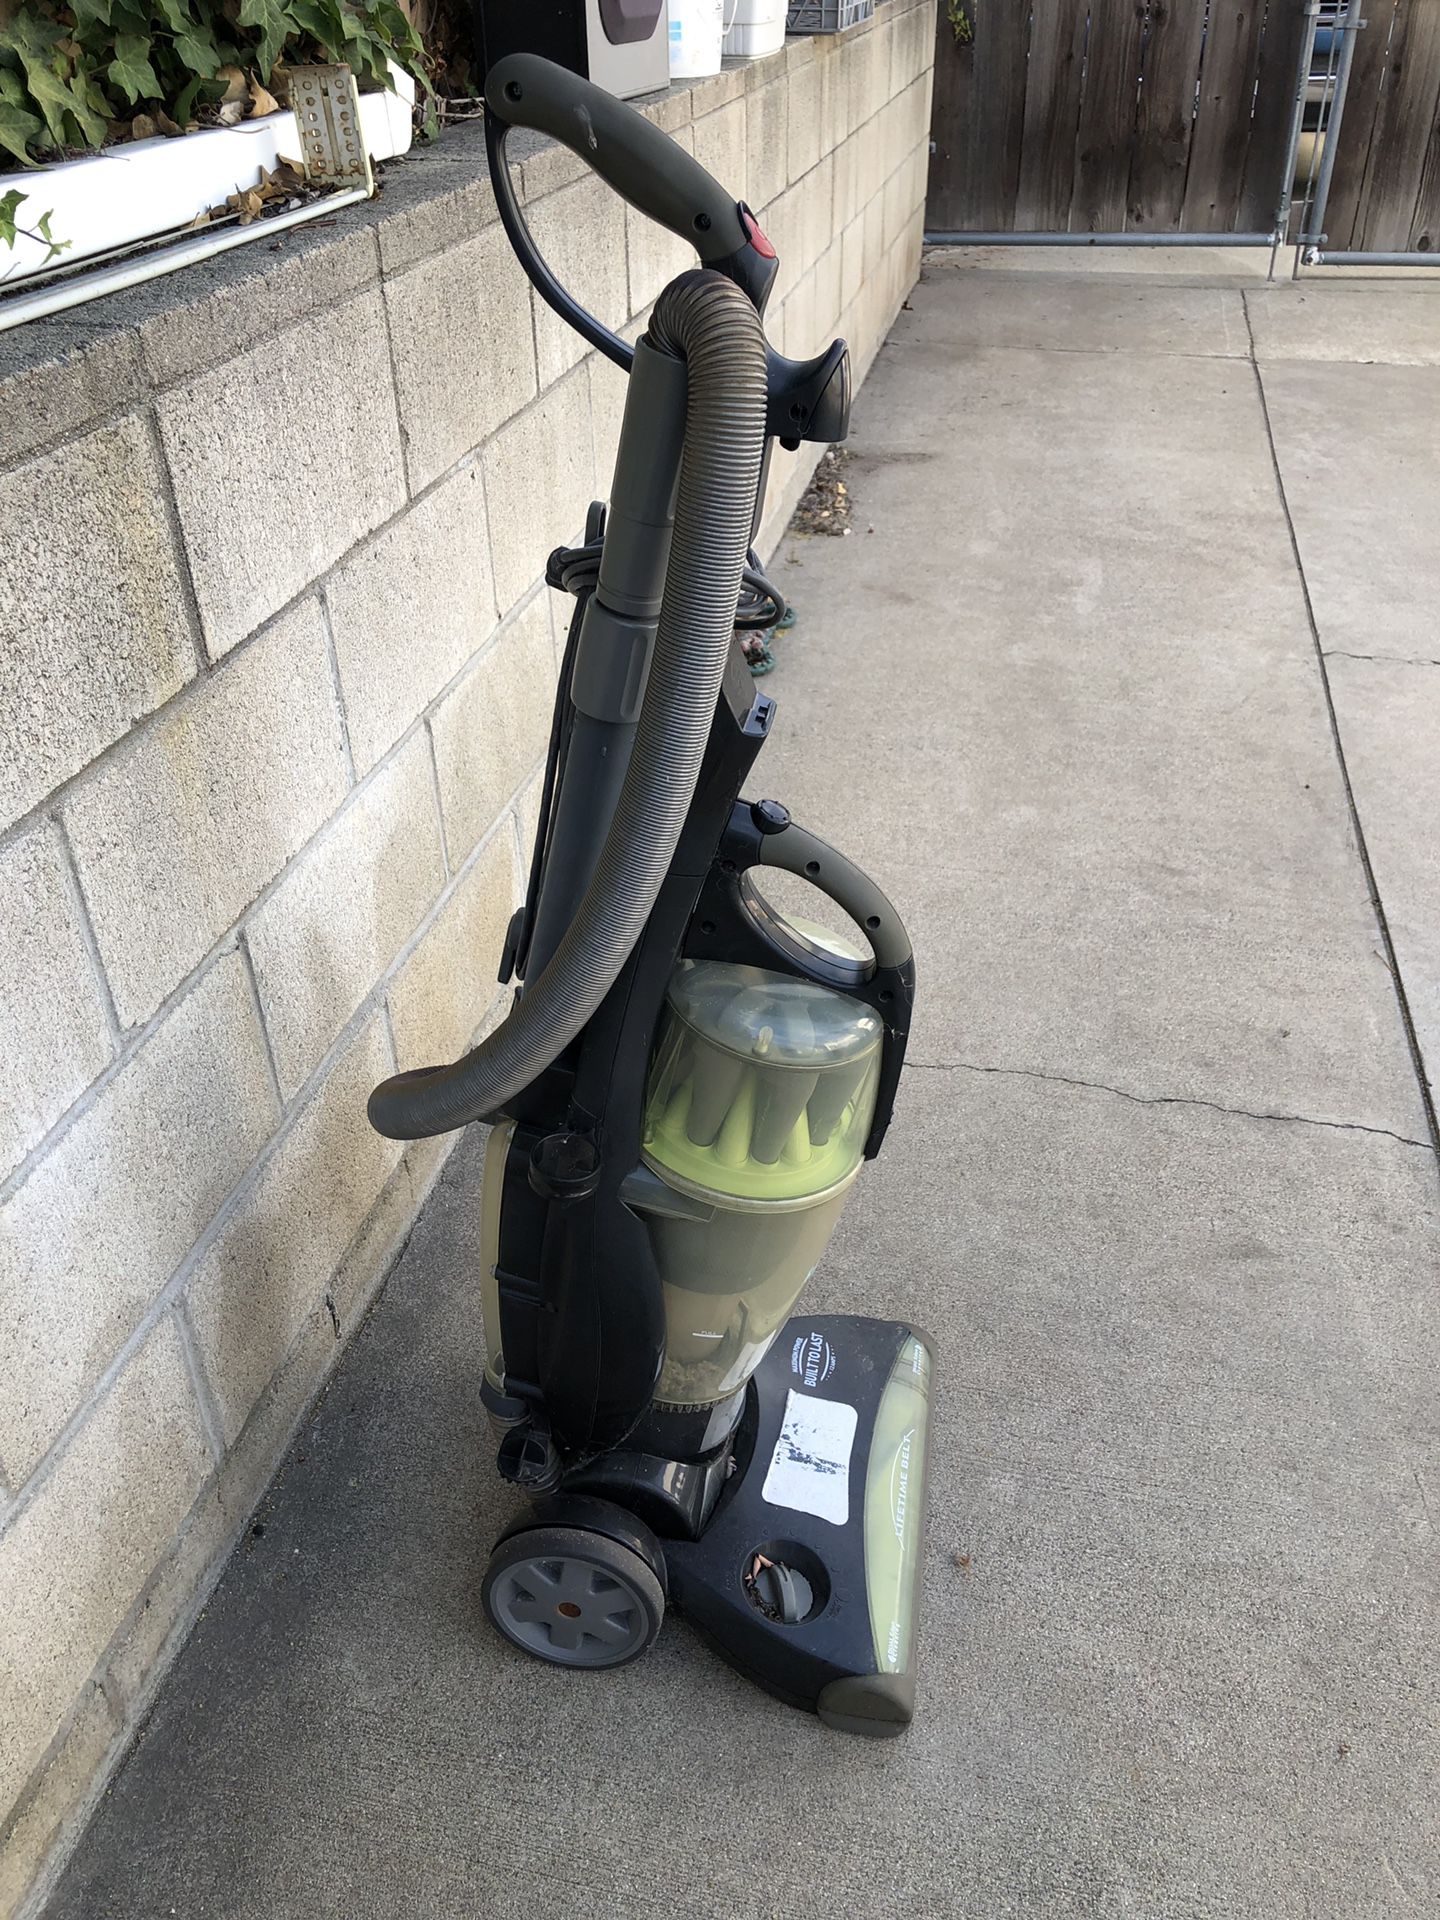 FREE Bissell Heavy Duty Vacuum to good home